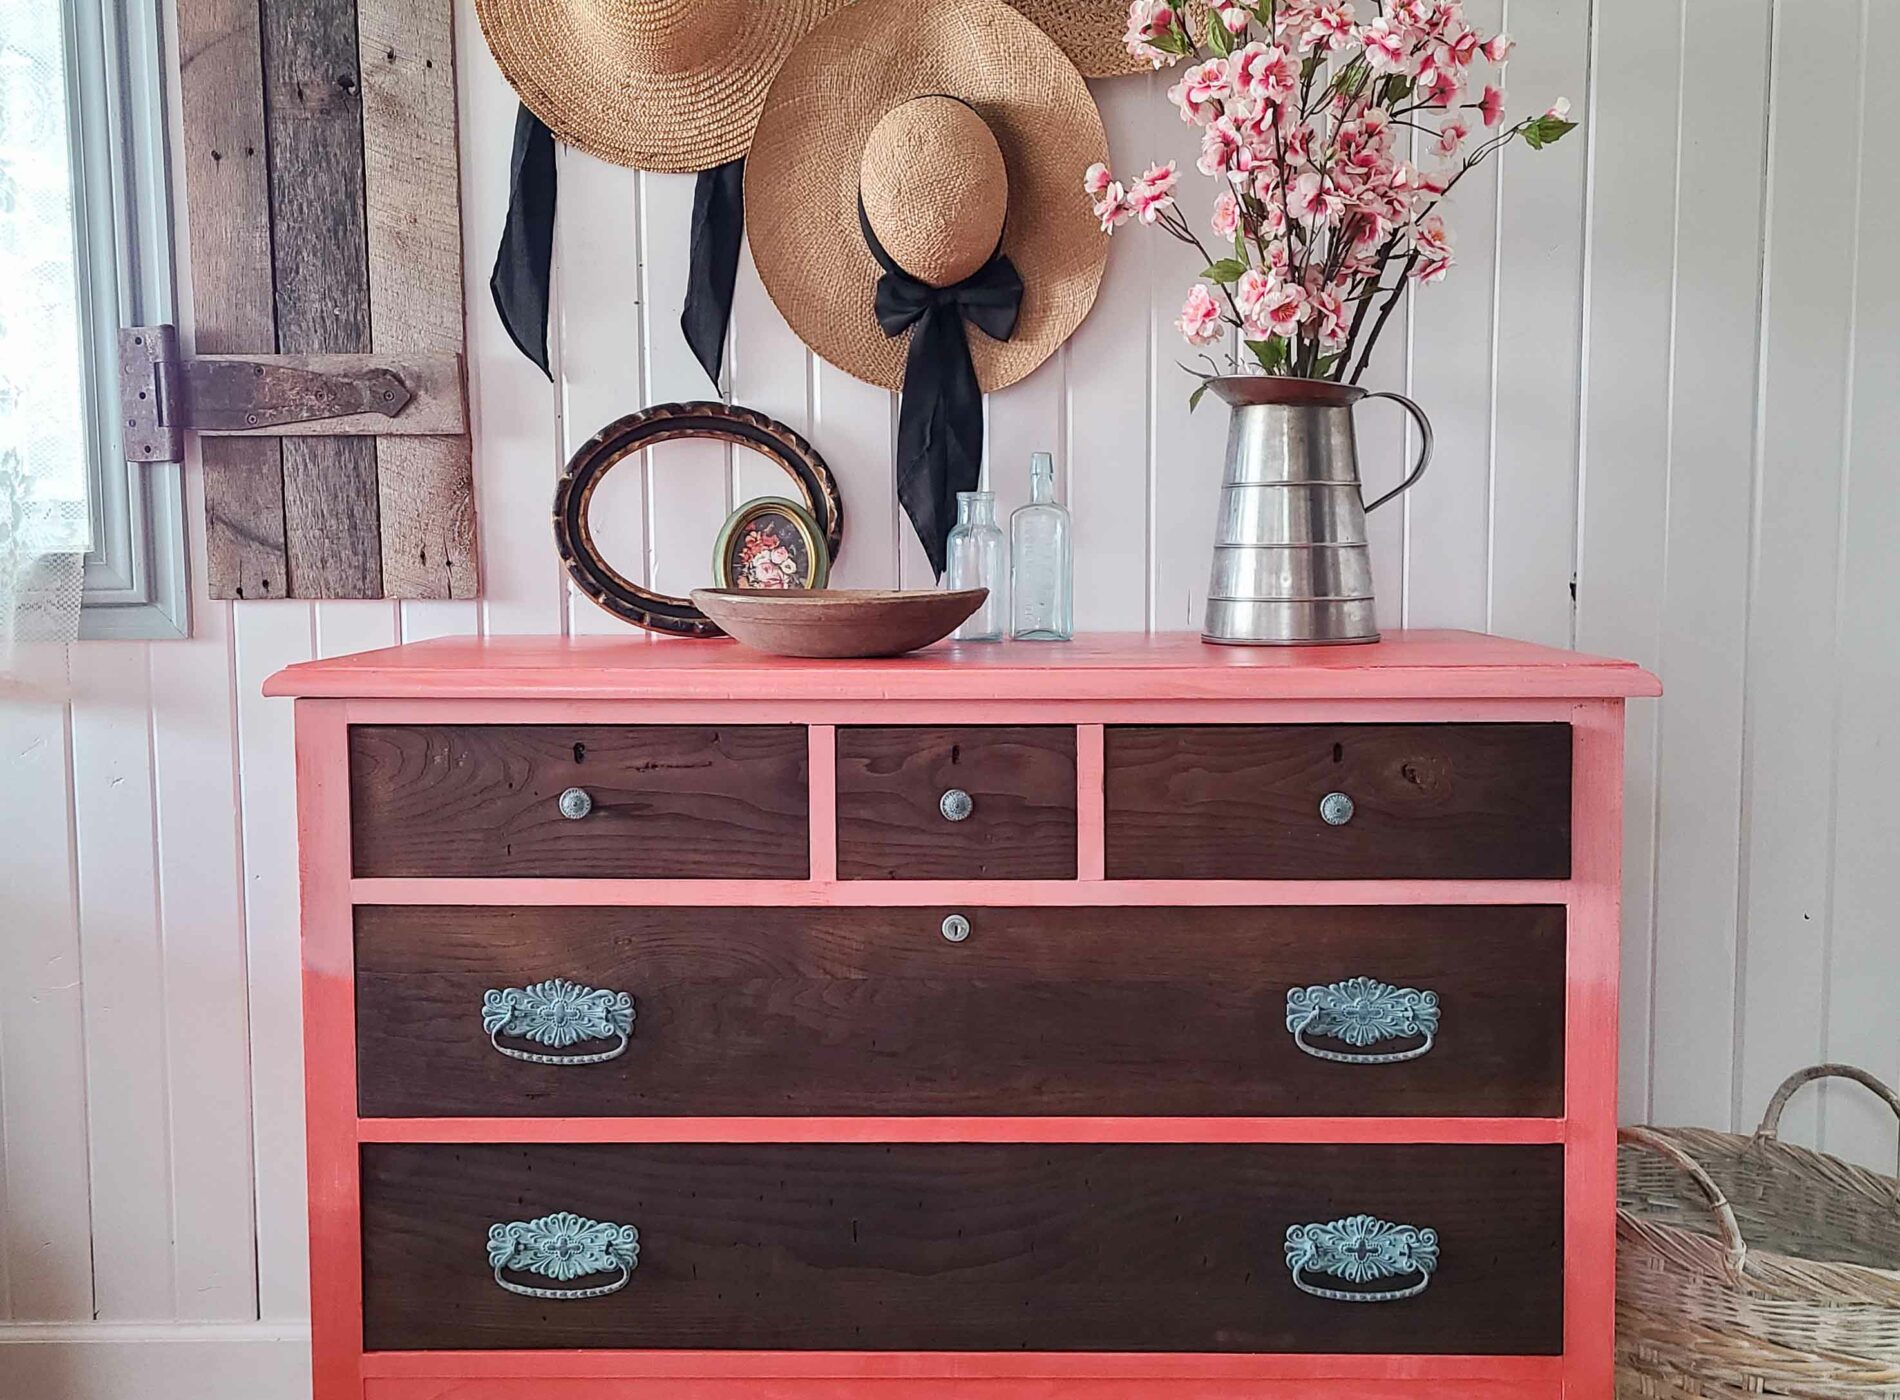 Boho Style Antique Dresser in Ombre Coral Pink available at Prodigal Pieces | shop.prodigalpieces.com #prodigalpieces #furniture